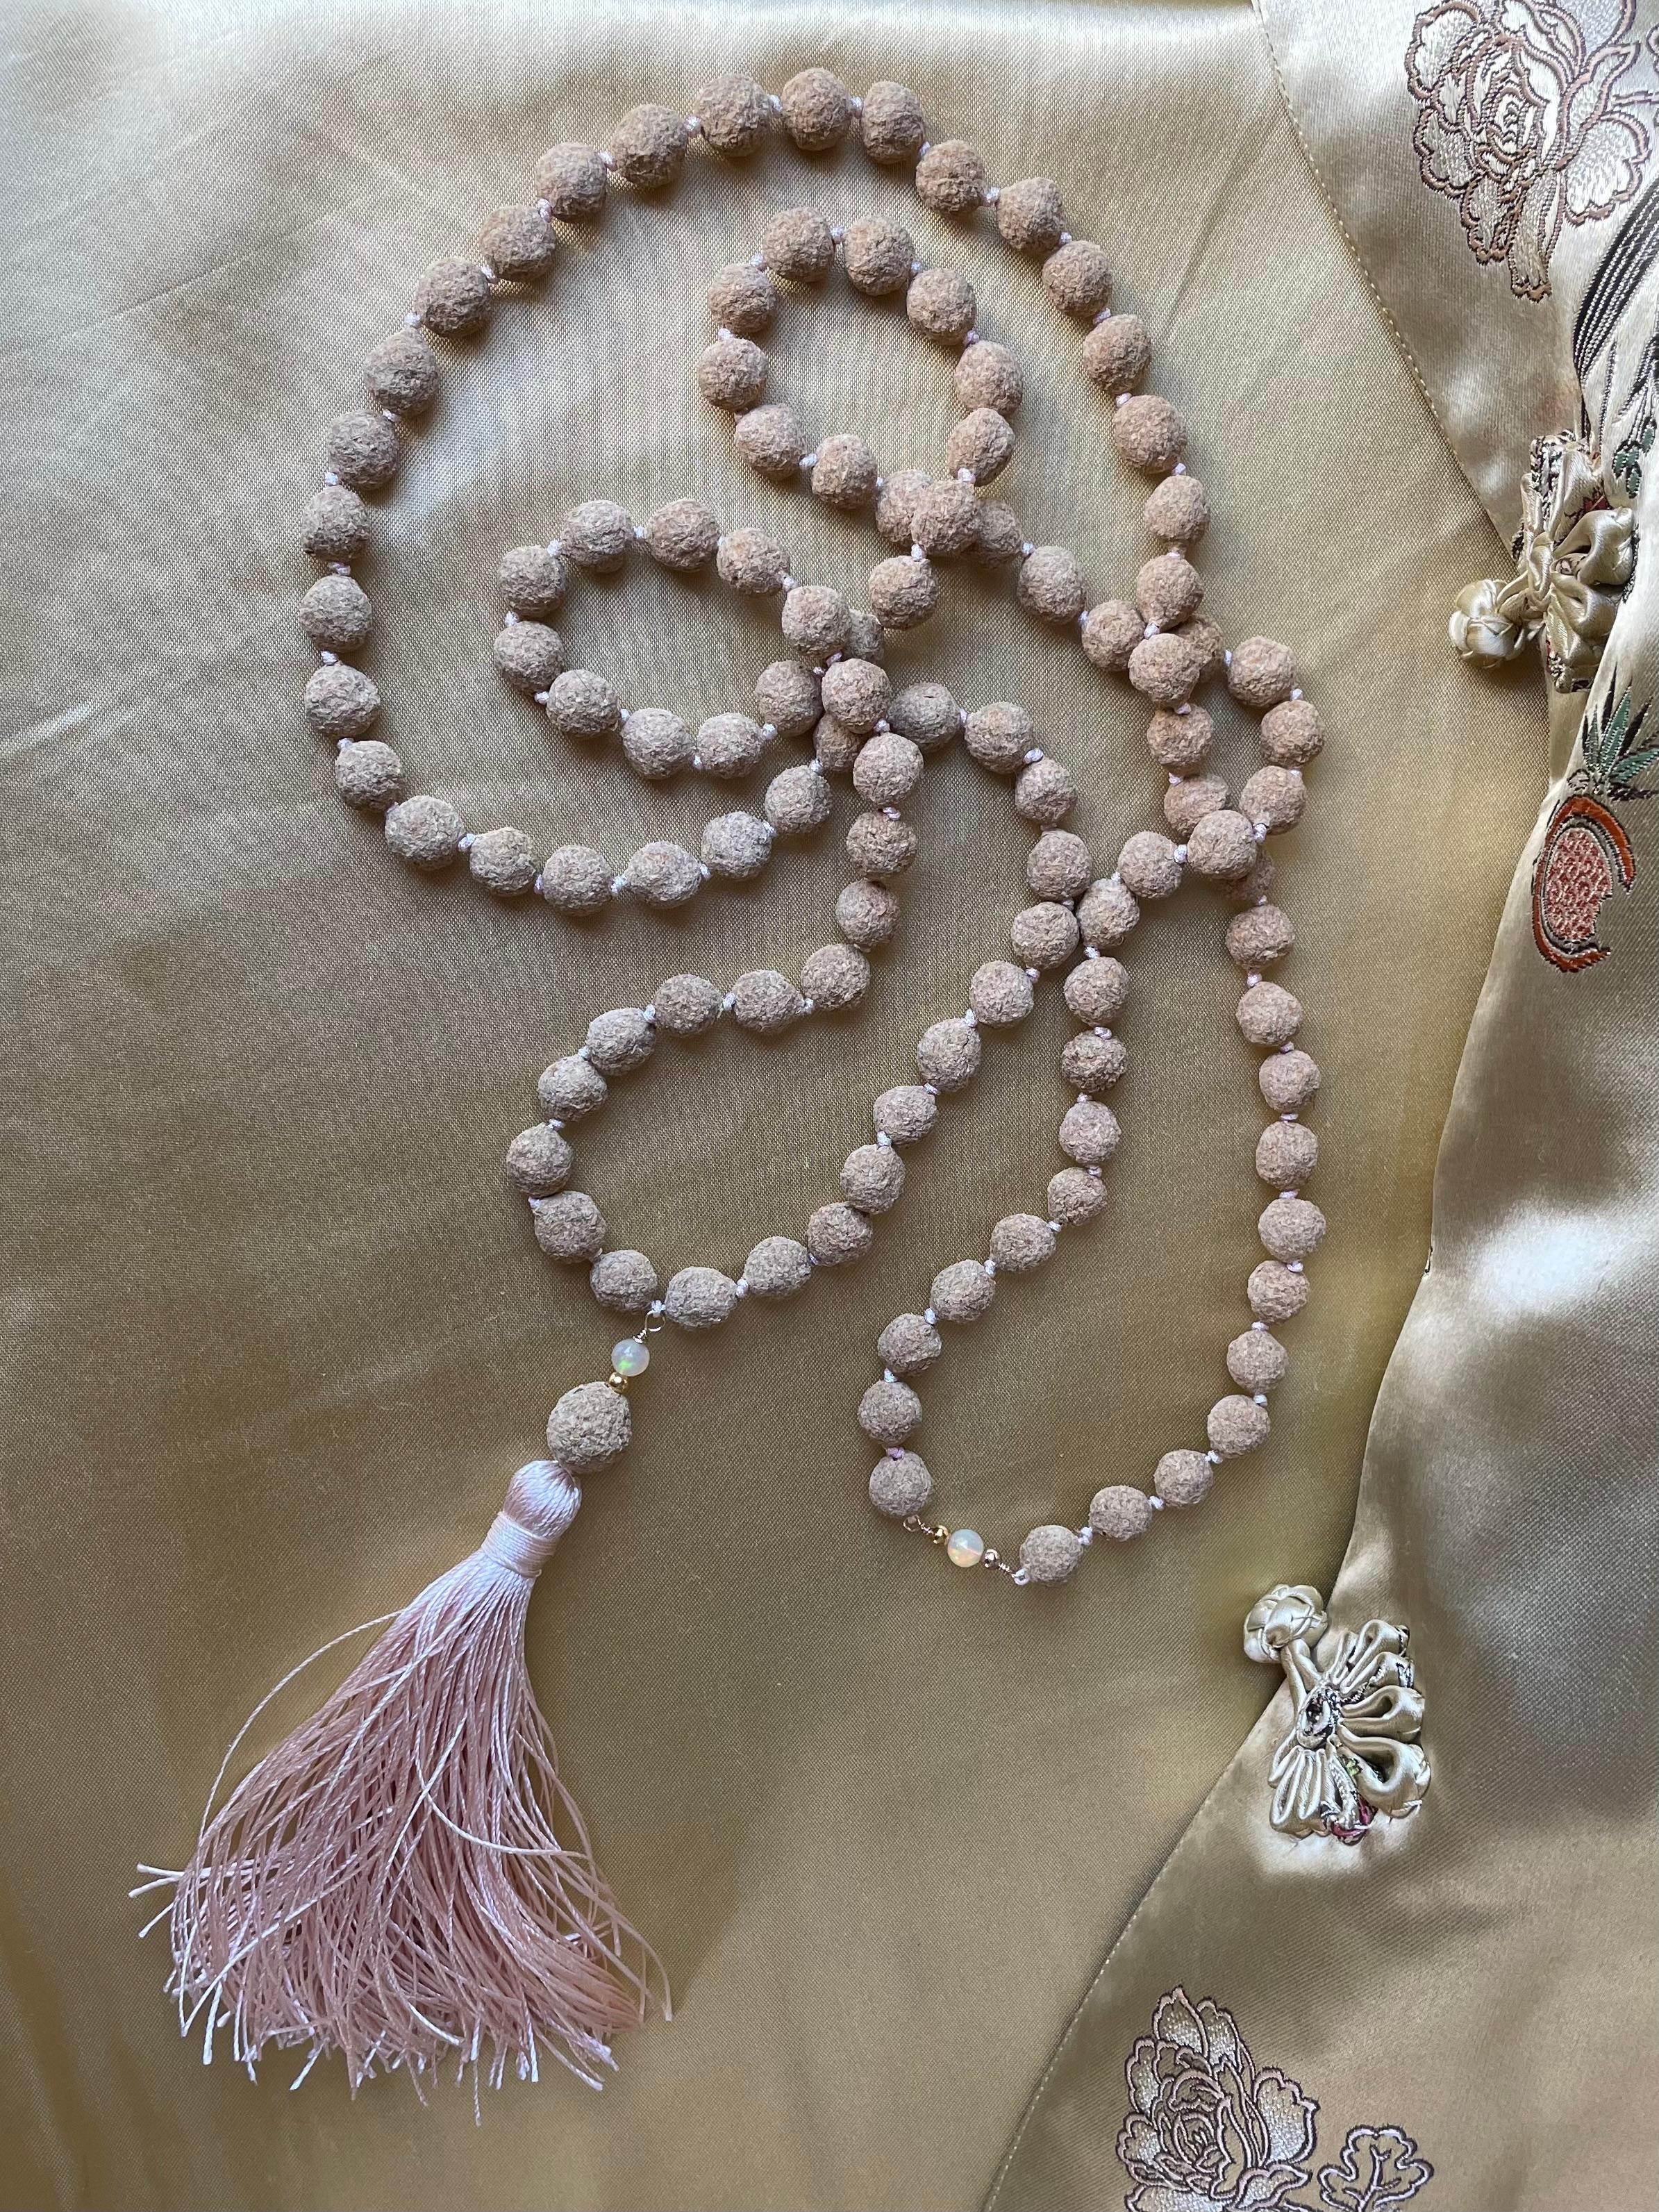 Every inch of this mala is steeped in a tradition of mystical artistry, born from hands that have dedicated years to the meticulous crafting of these sacred pieces. The artisan's dedication and expertise are evident in every detail, from the choice